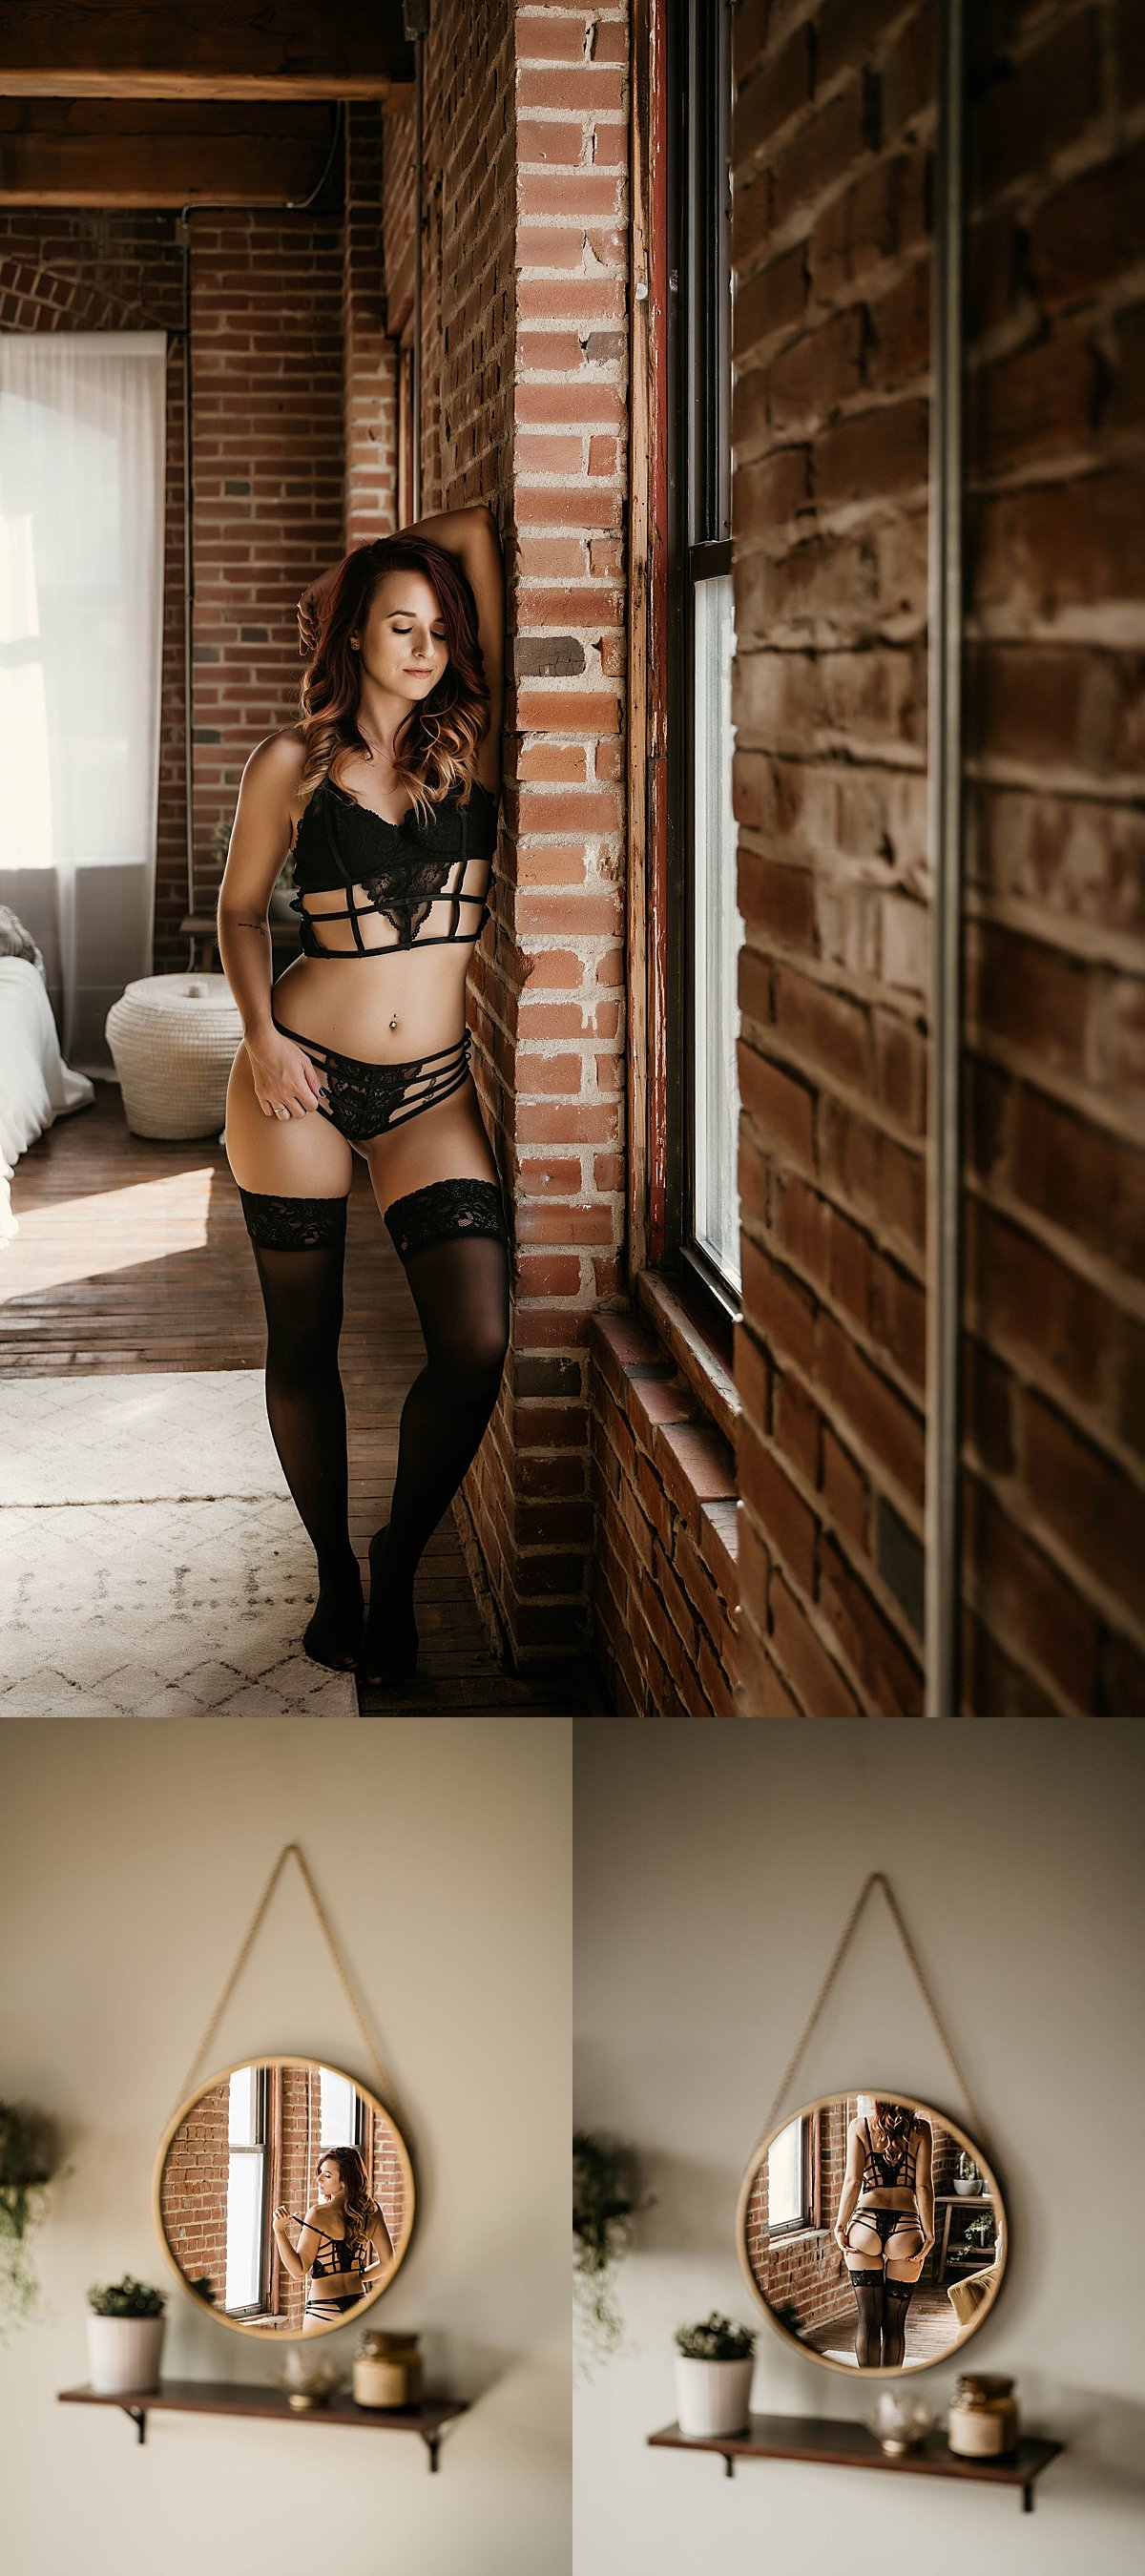  standing up against wall wearing tall black stockings for Las Vegas boudoir photographer  